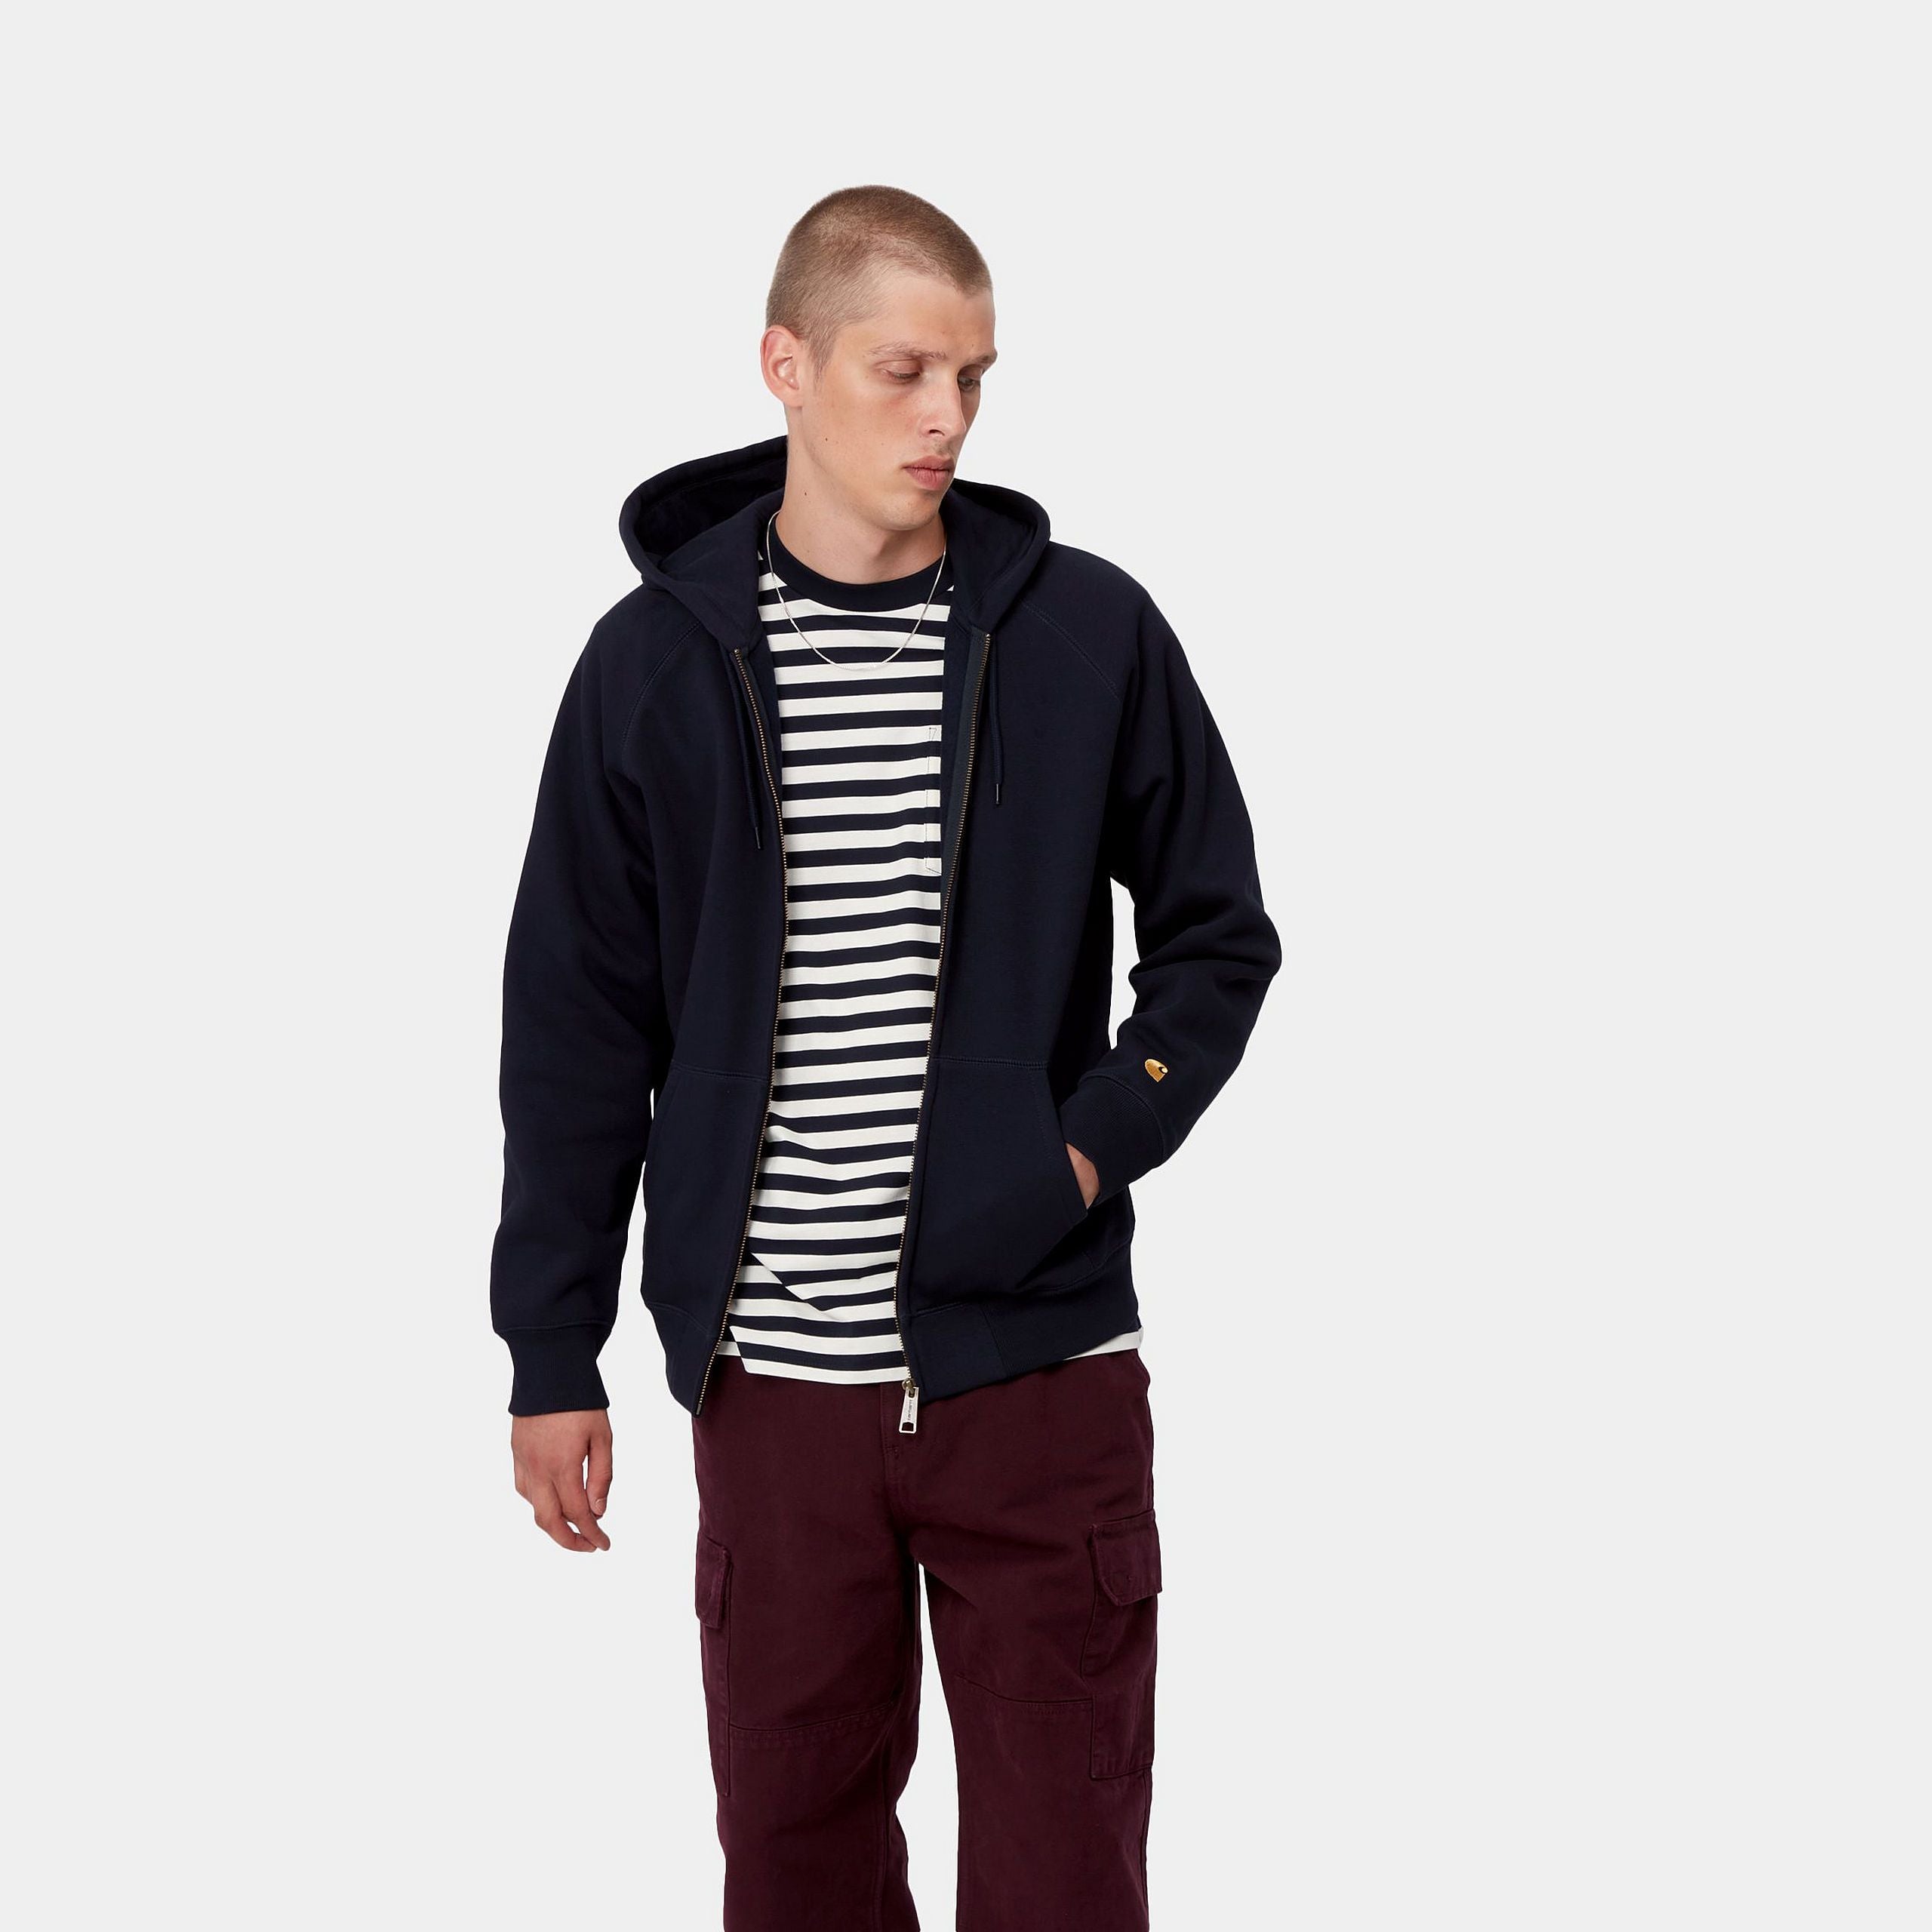 Carhartt WIP   Hooded Chase Jacket